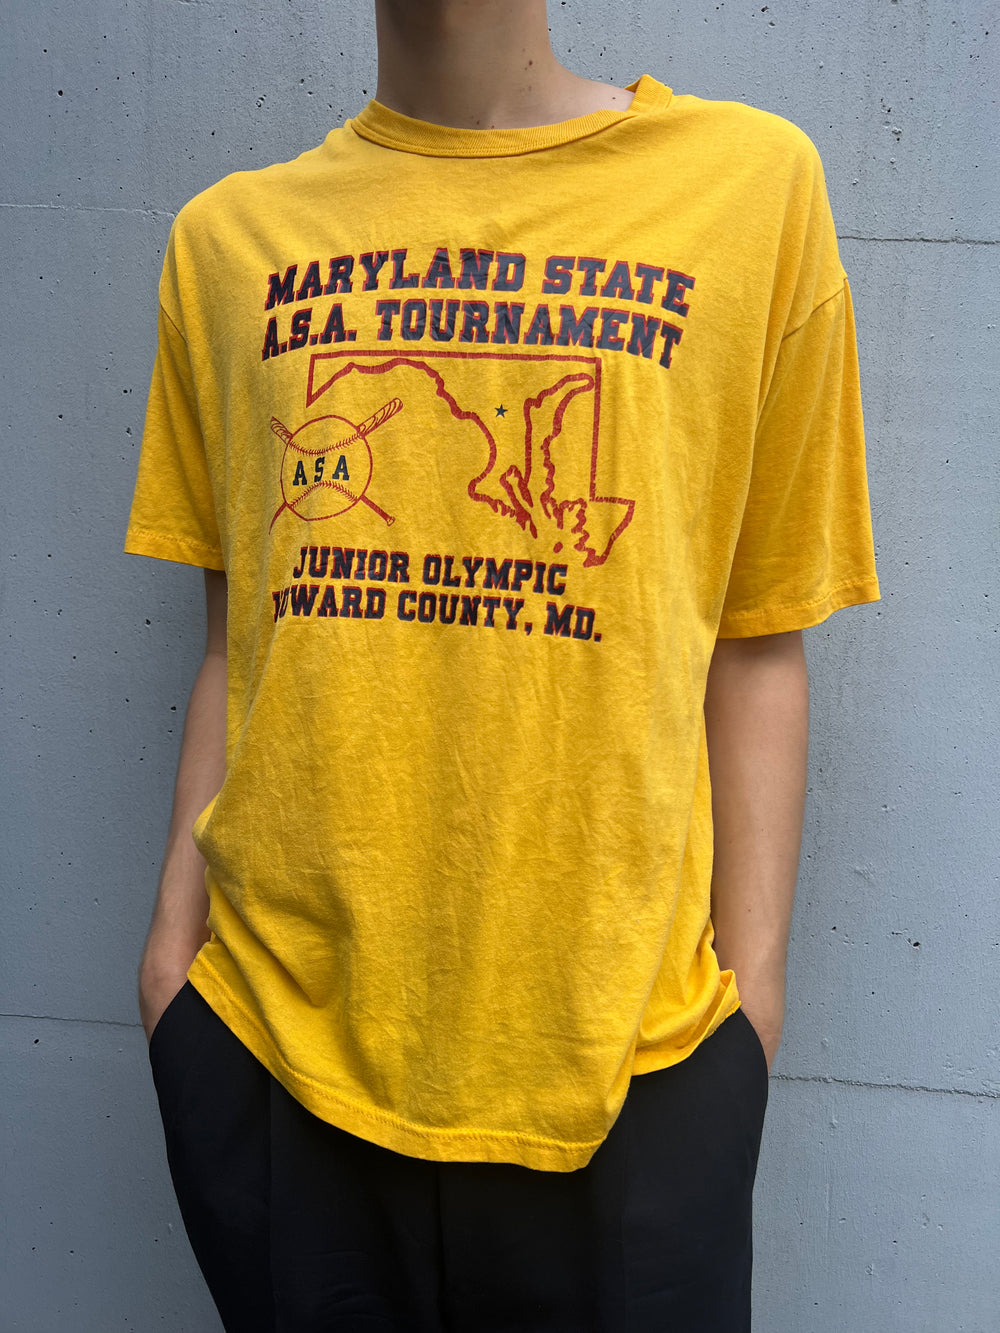 Vintage 1980s Russell Single Stitched Maryland State A.S.A. Tournament Baseball T-Shirt (L/XL)